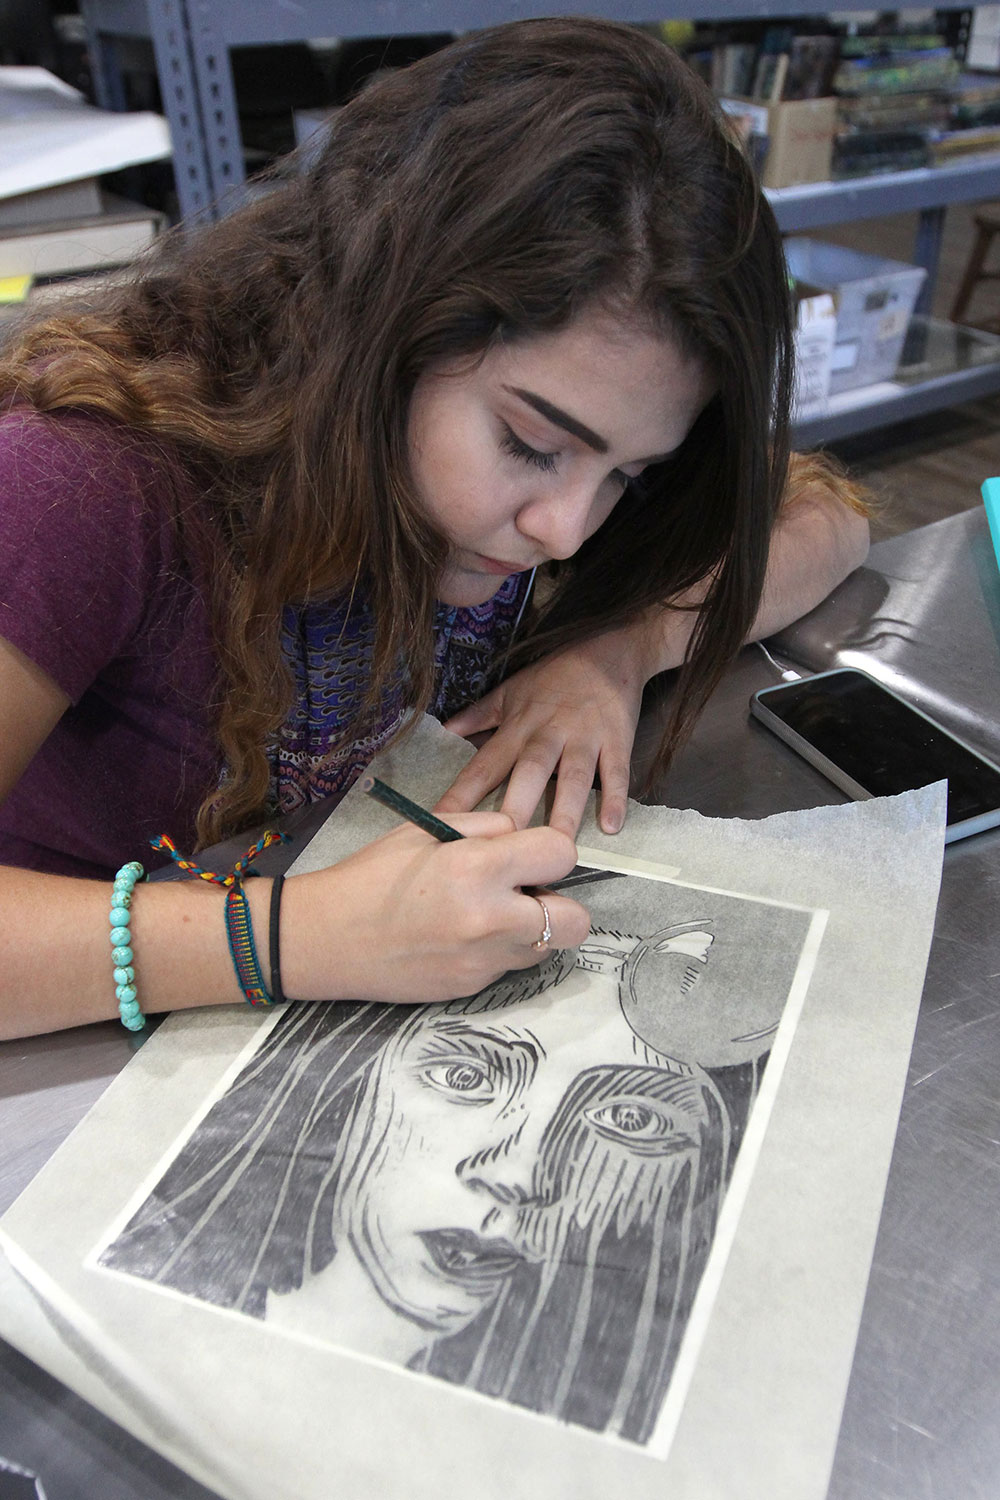 St. Louis art art and design student drawing 